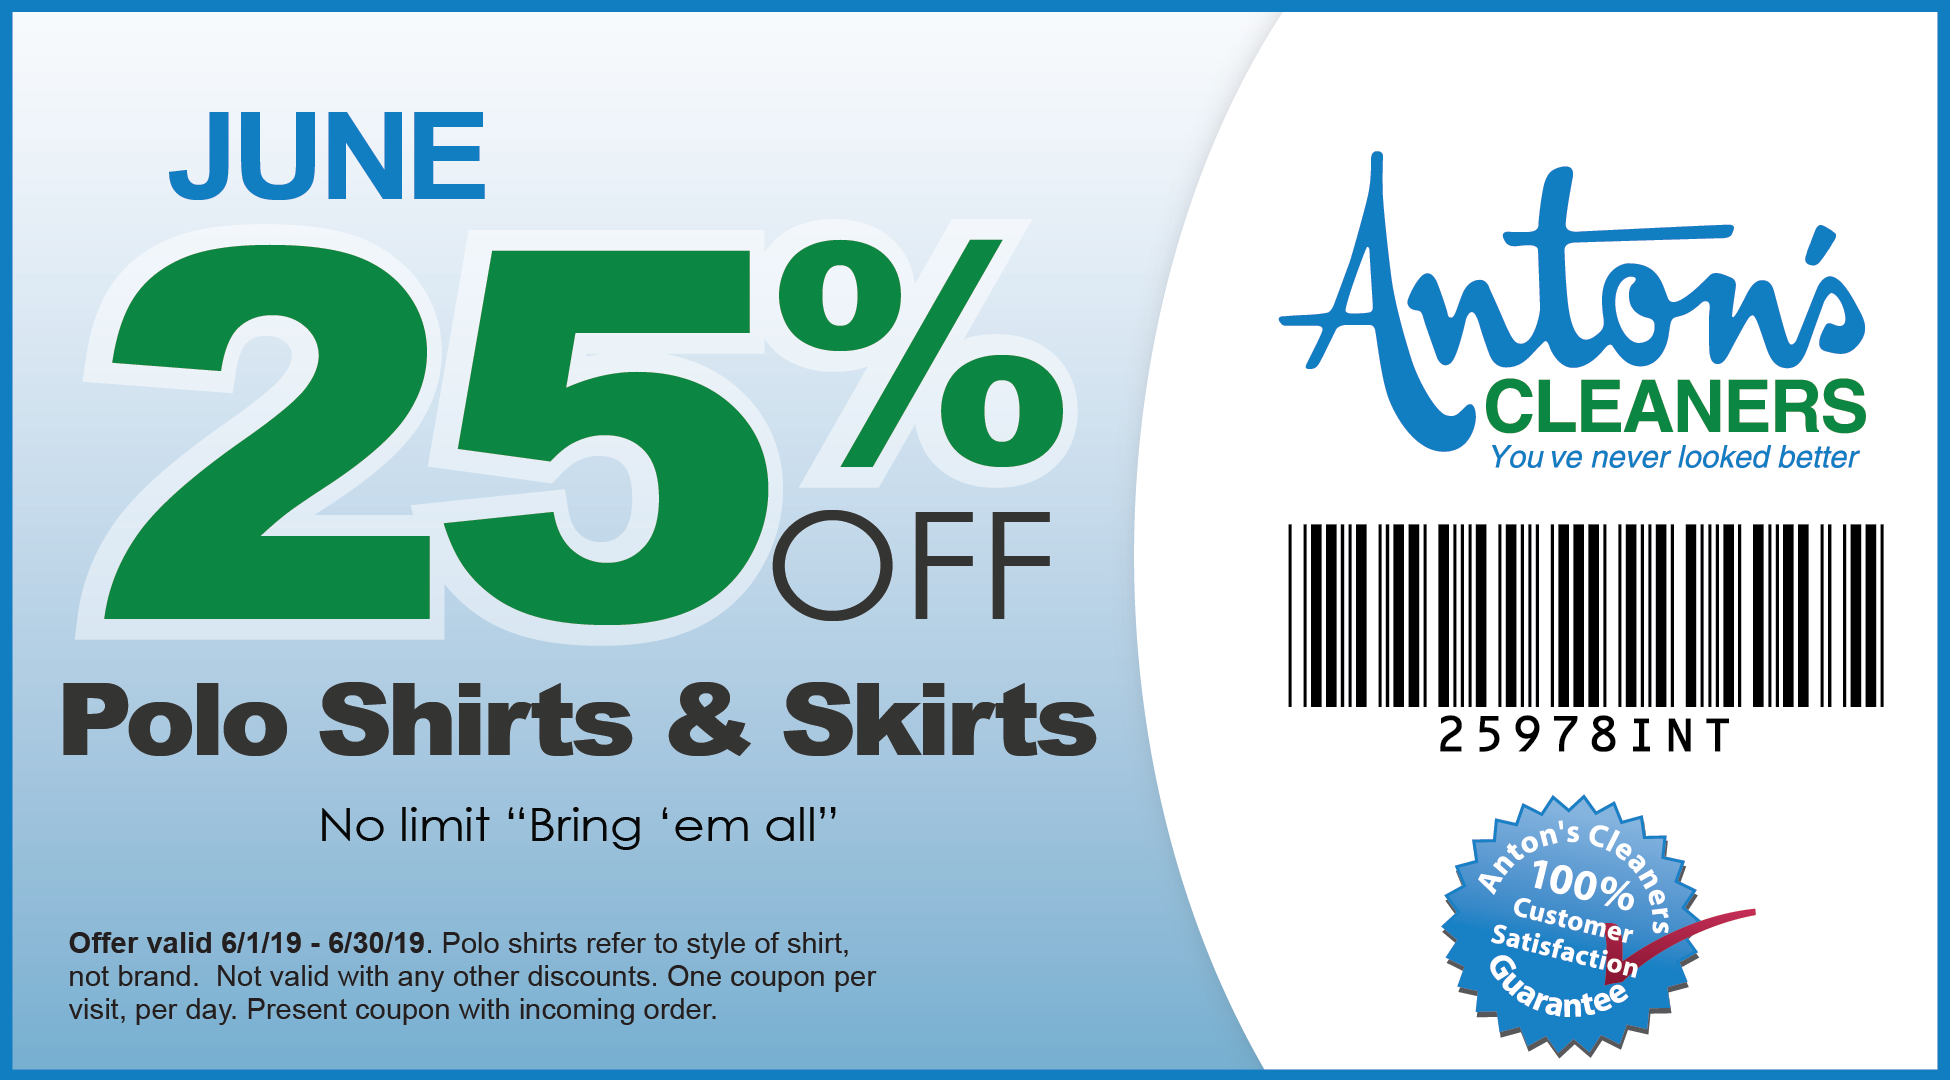 Monthly Coupon Archives - Anton's Cleaners : Anton's Cleaners